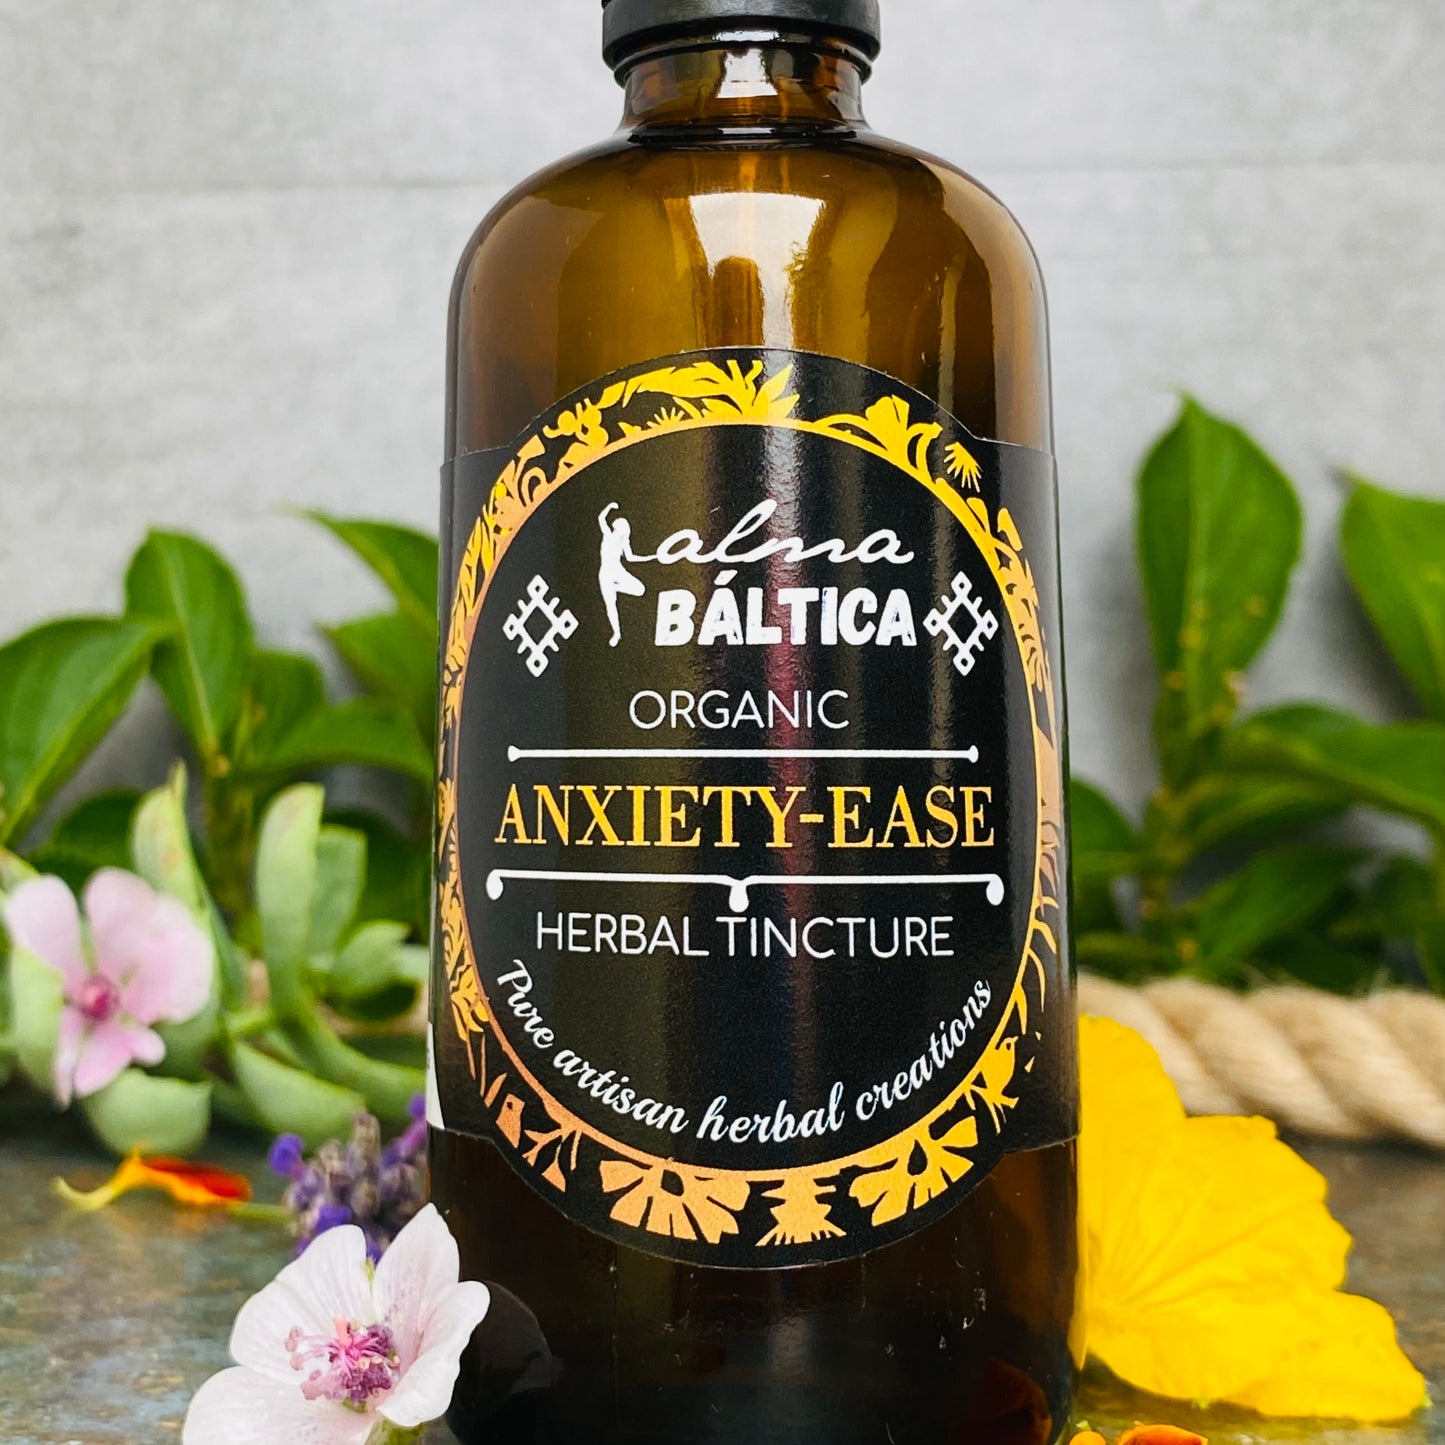 Stress & Anxiety Relief Tincture | ANXIETY-EASE